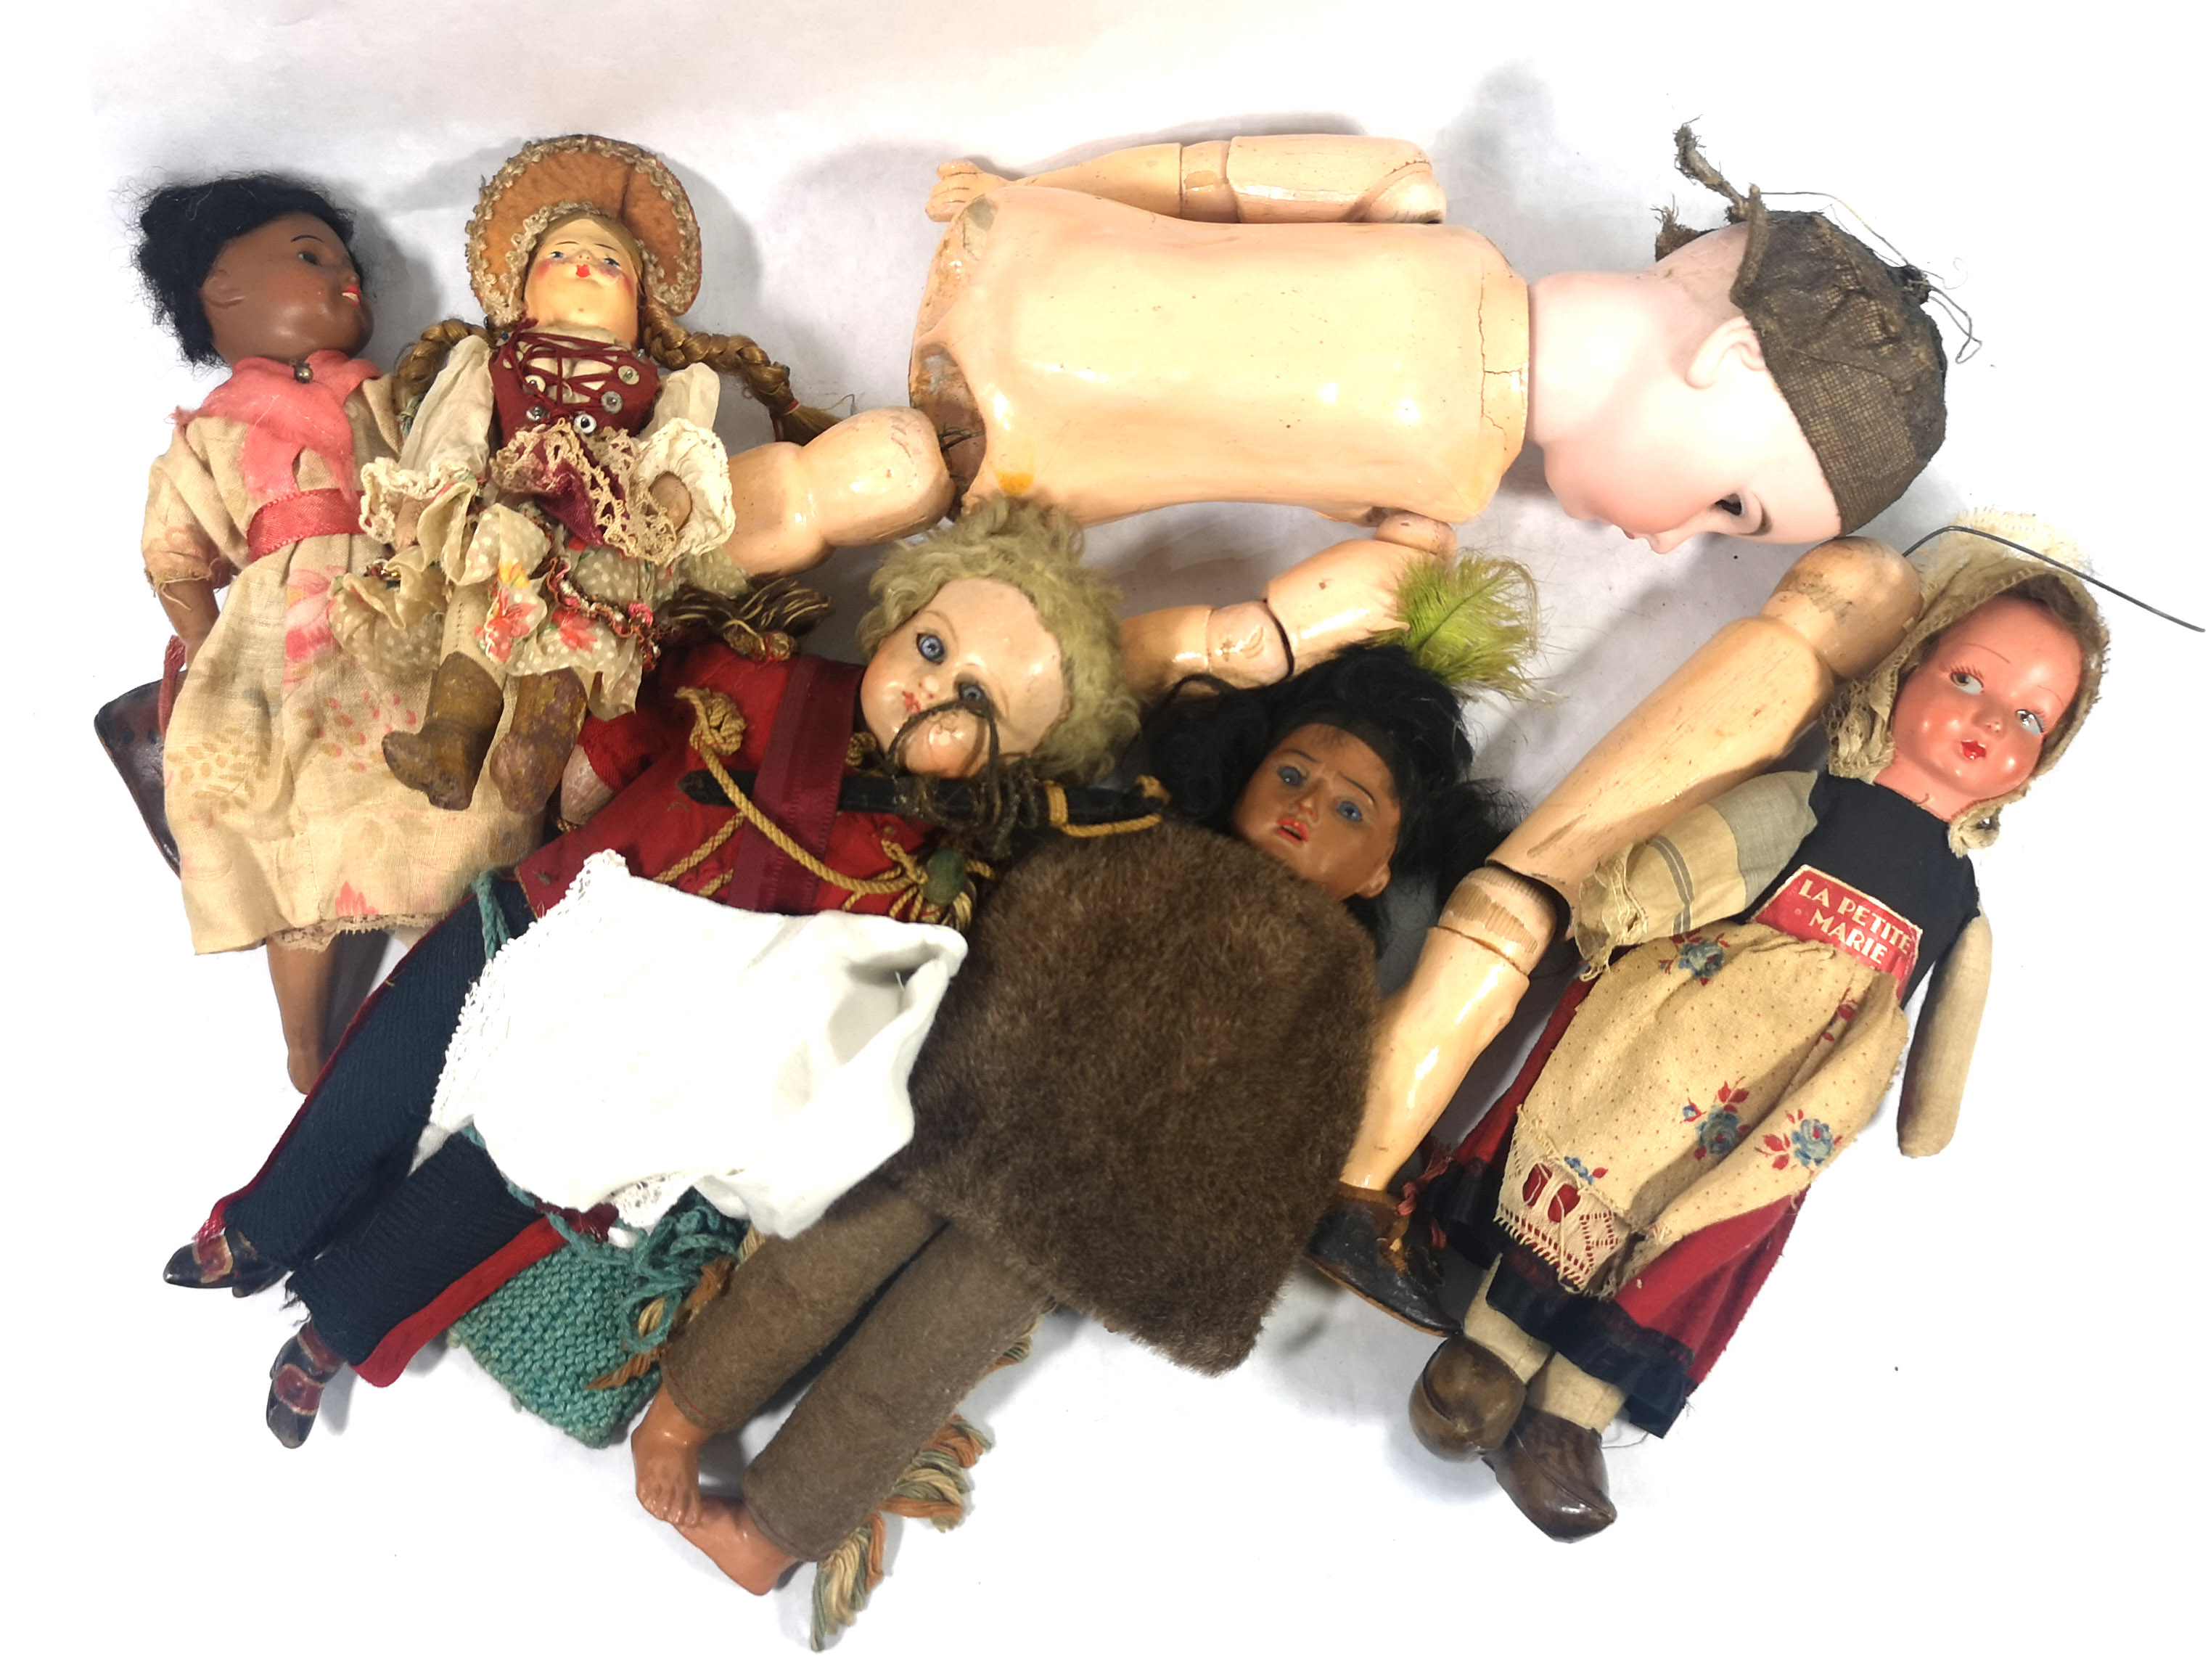 A COLLECTION OF LATE 19TH/EARLY 20TH CENTURY BISQUE PORCELAIN AND PAPIER-MÂCHÉ DOLLS Including